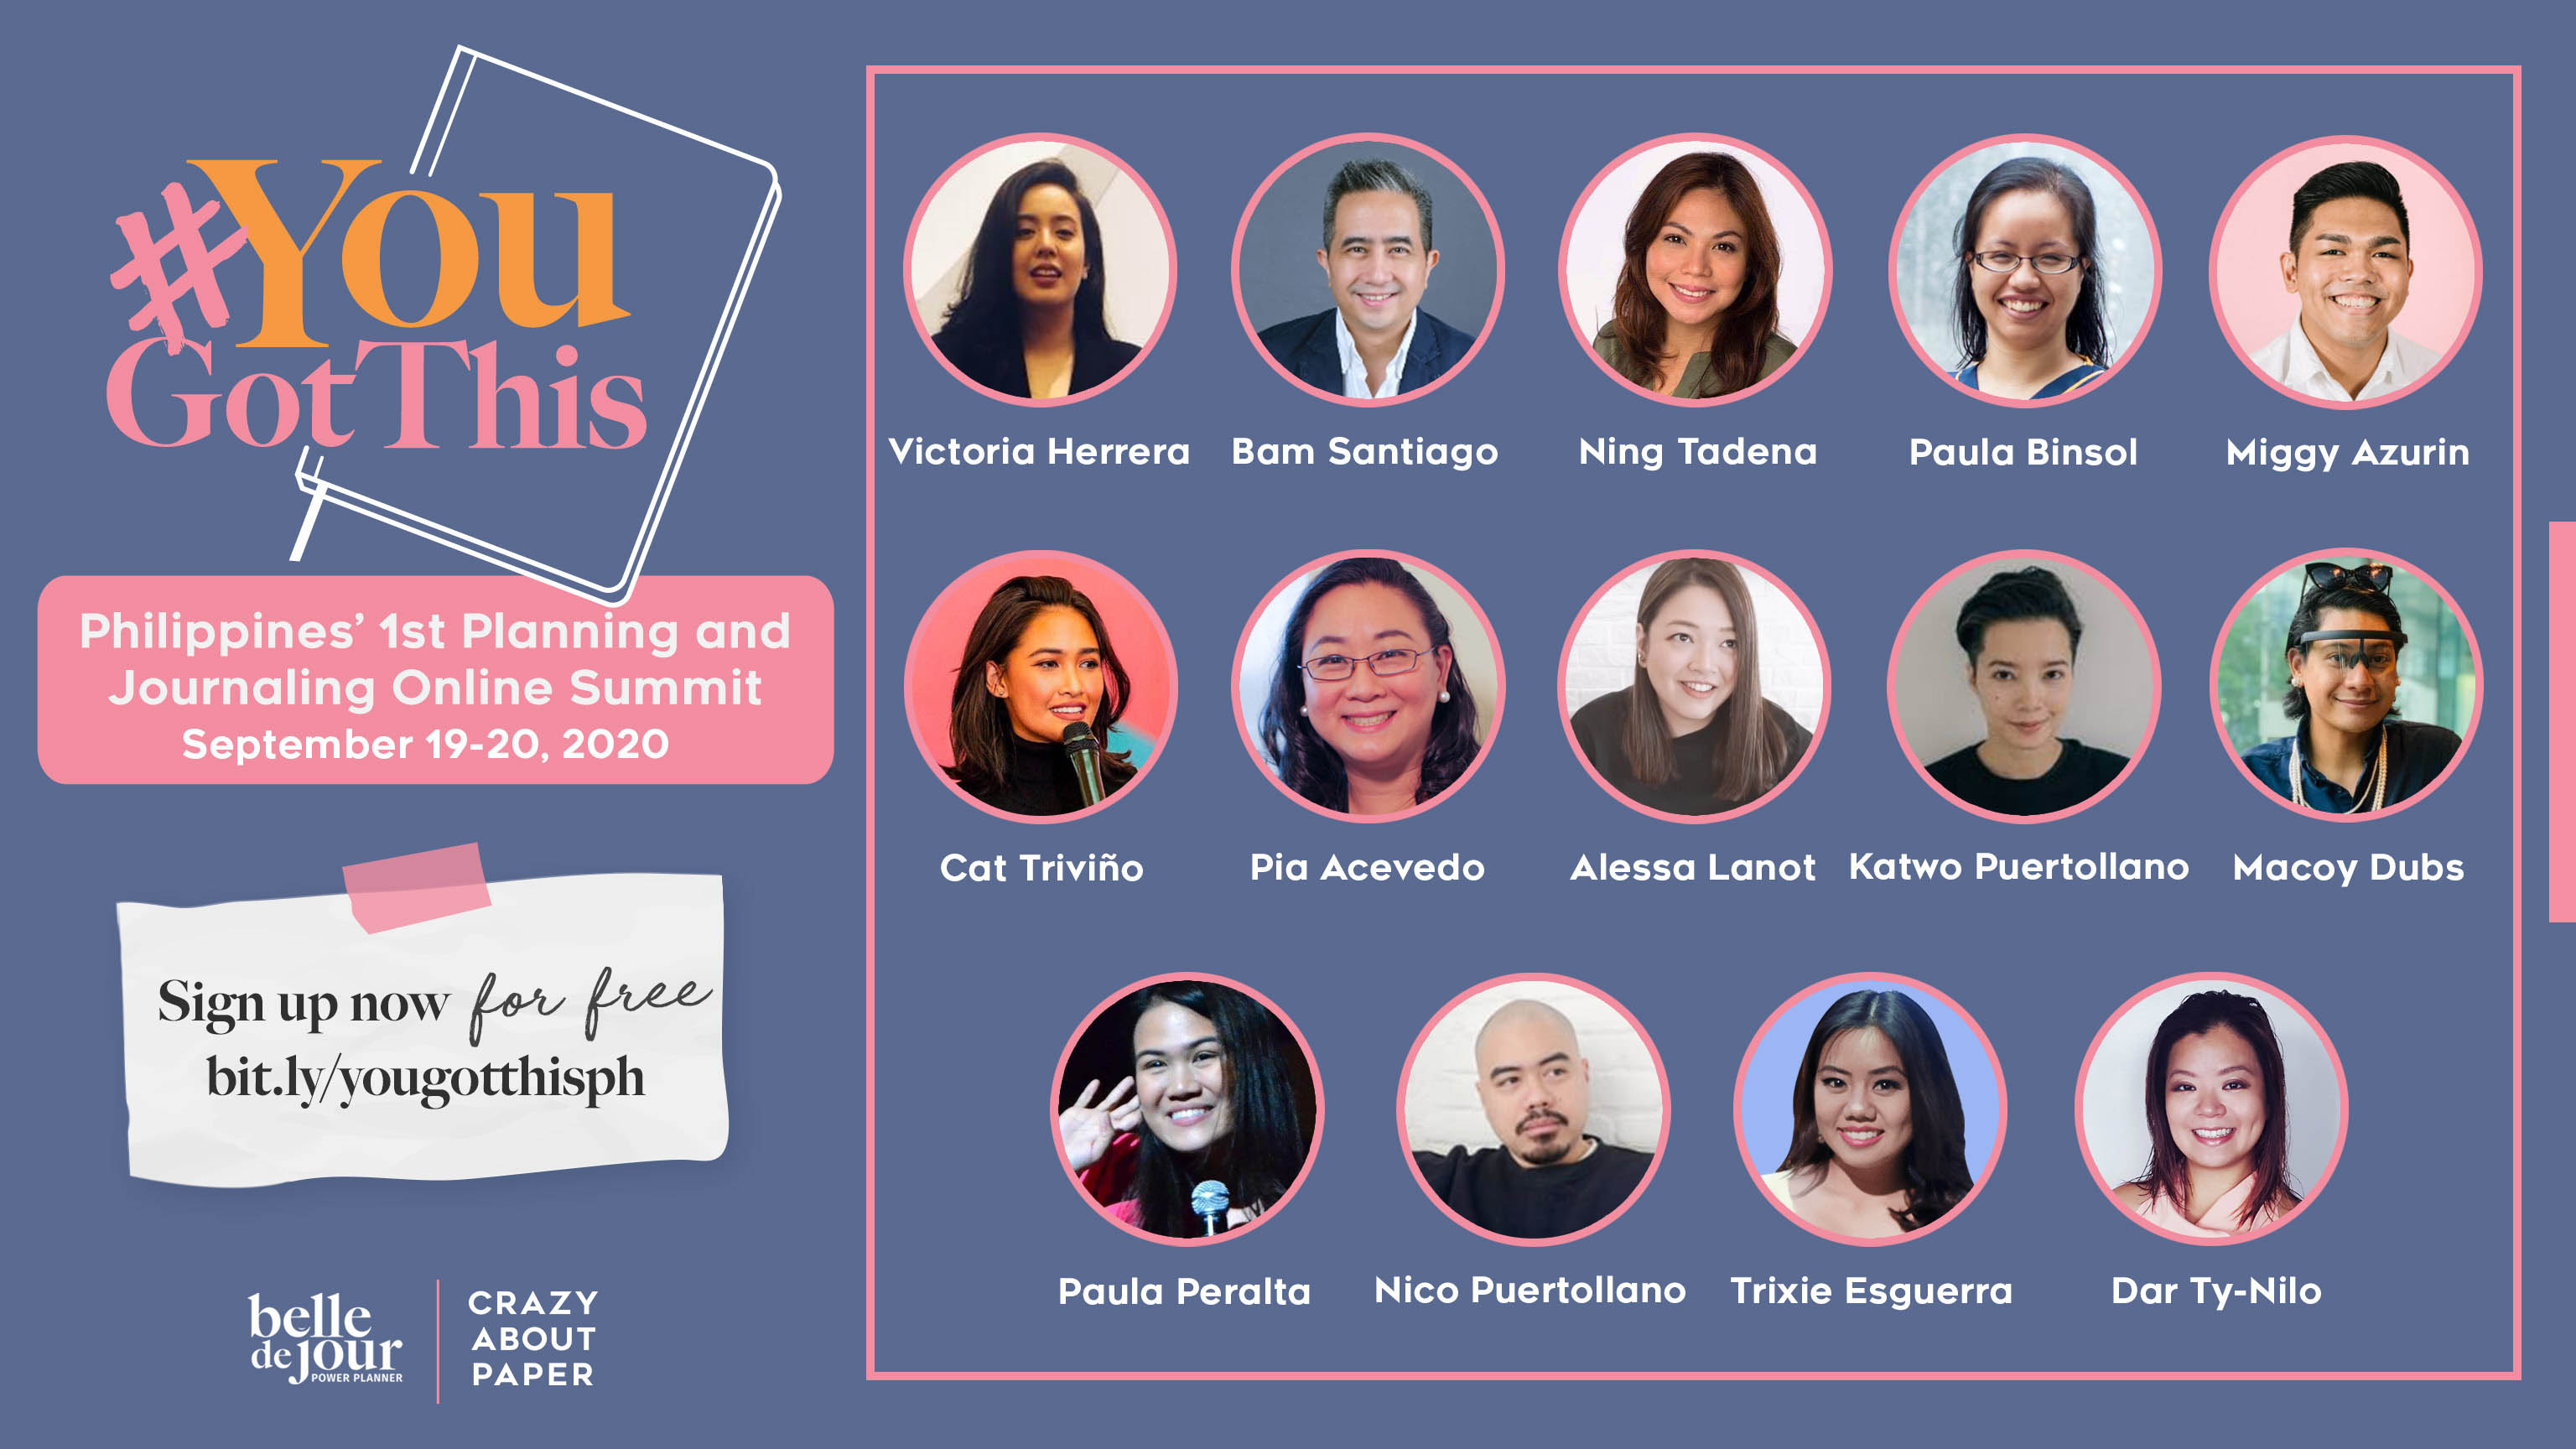 Viviamo Inc. holds its first planning and journaling online summit called #YouGotThis